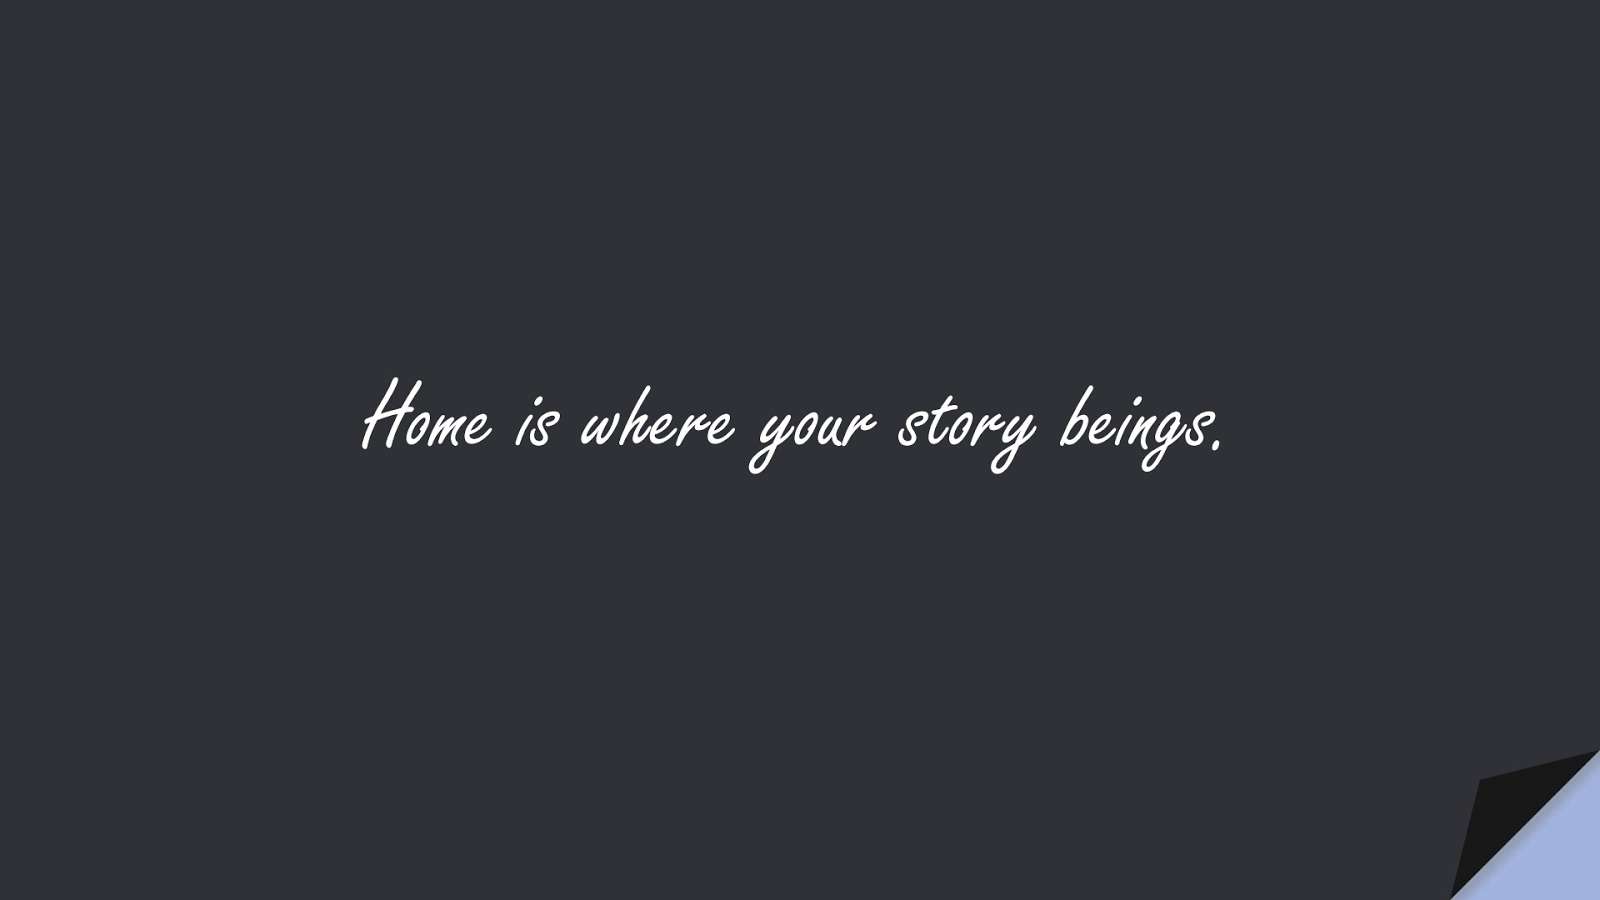 Home is where your story beings.FALSE